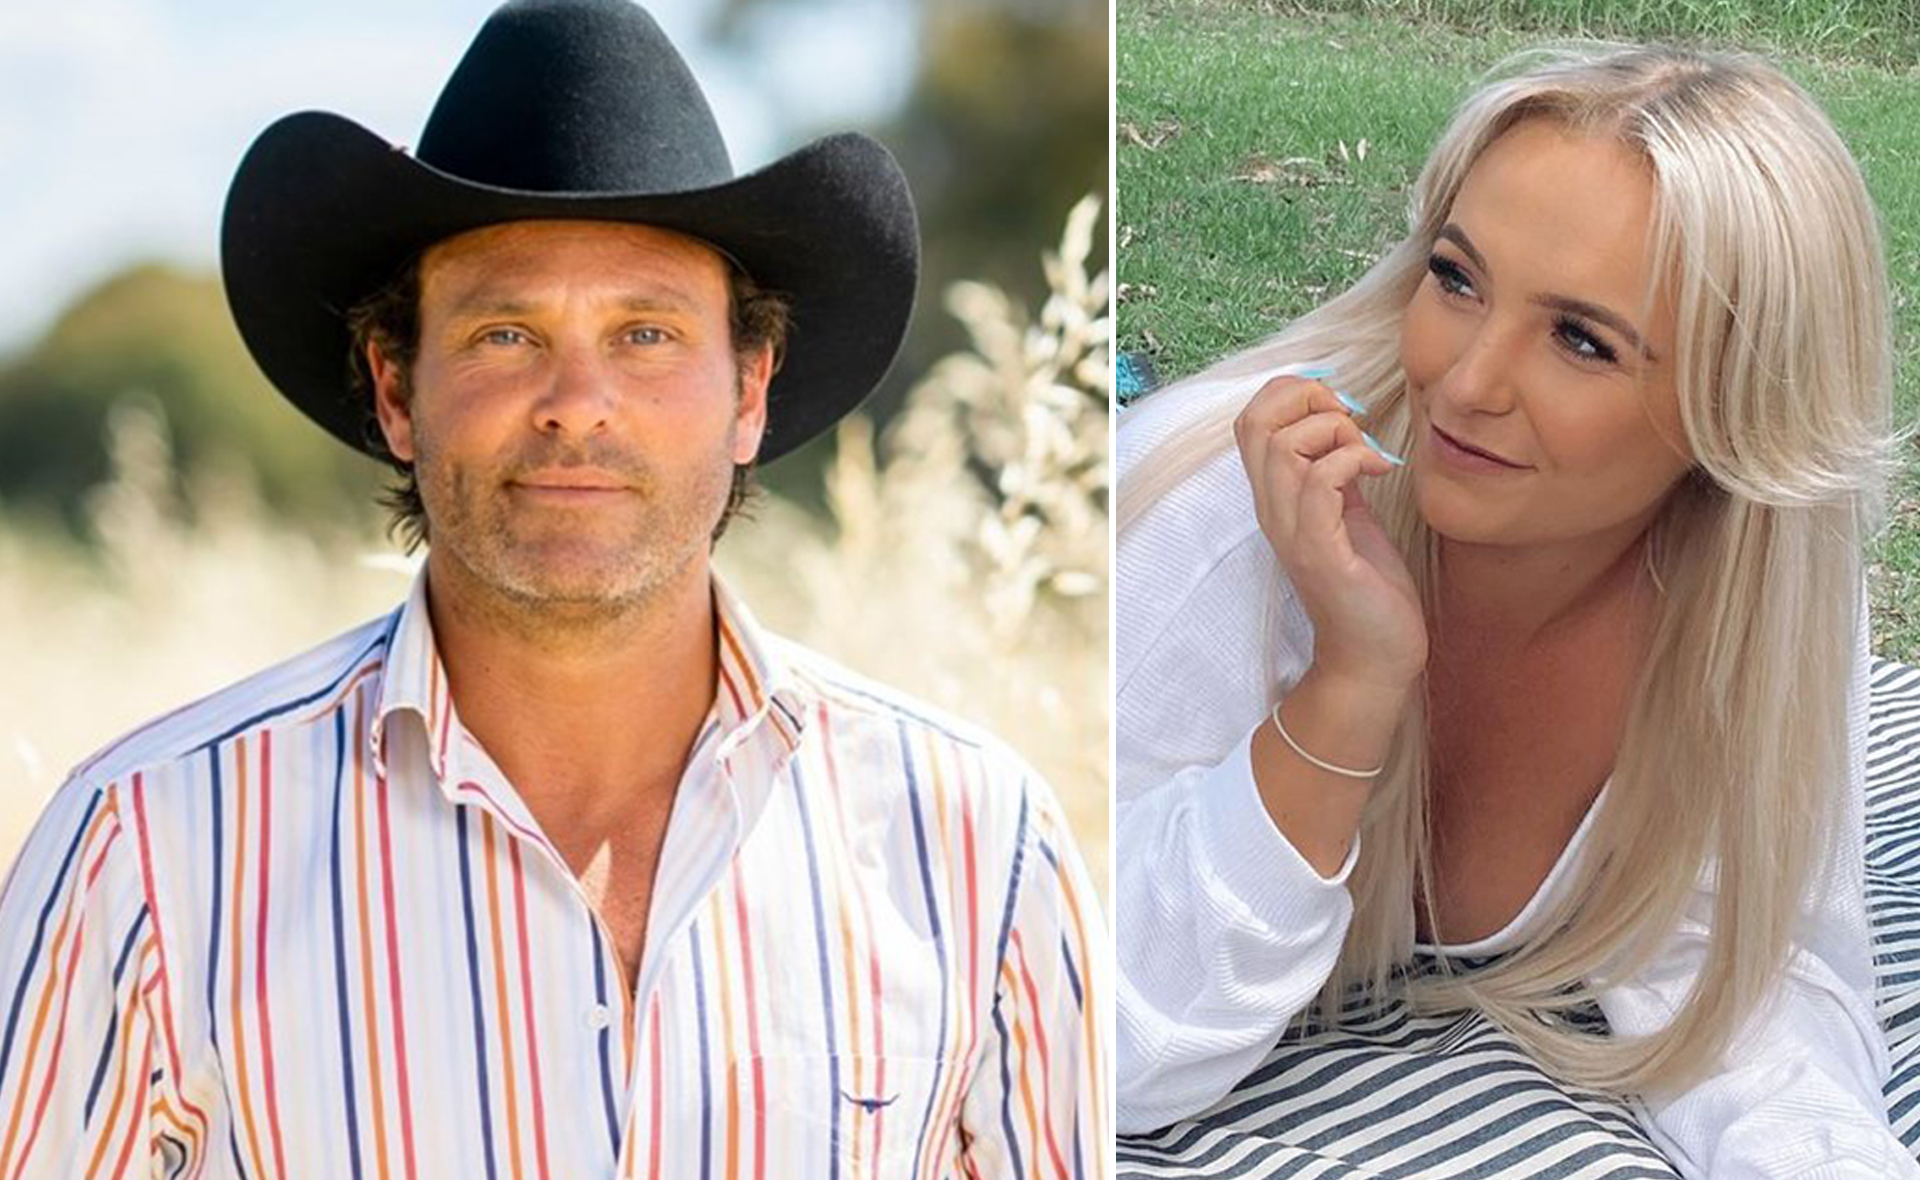 Farmer Will breaks his silence after Hayley revealed that she’s pregnant with his child